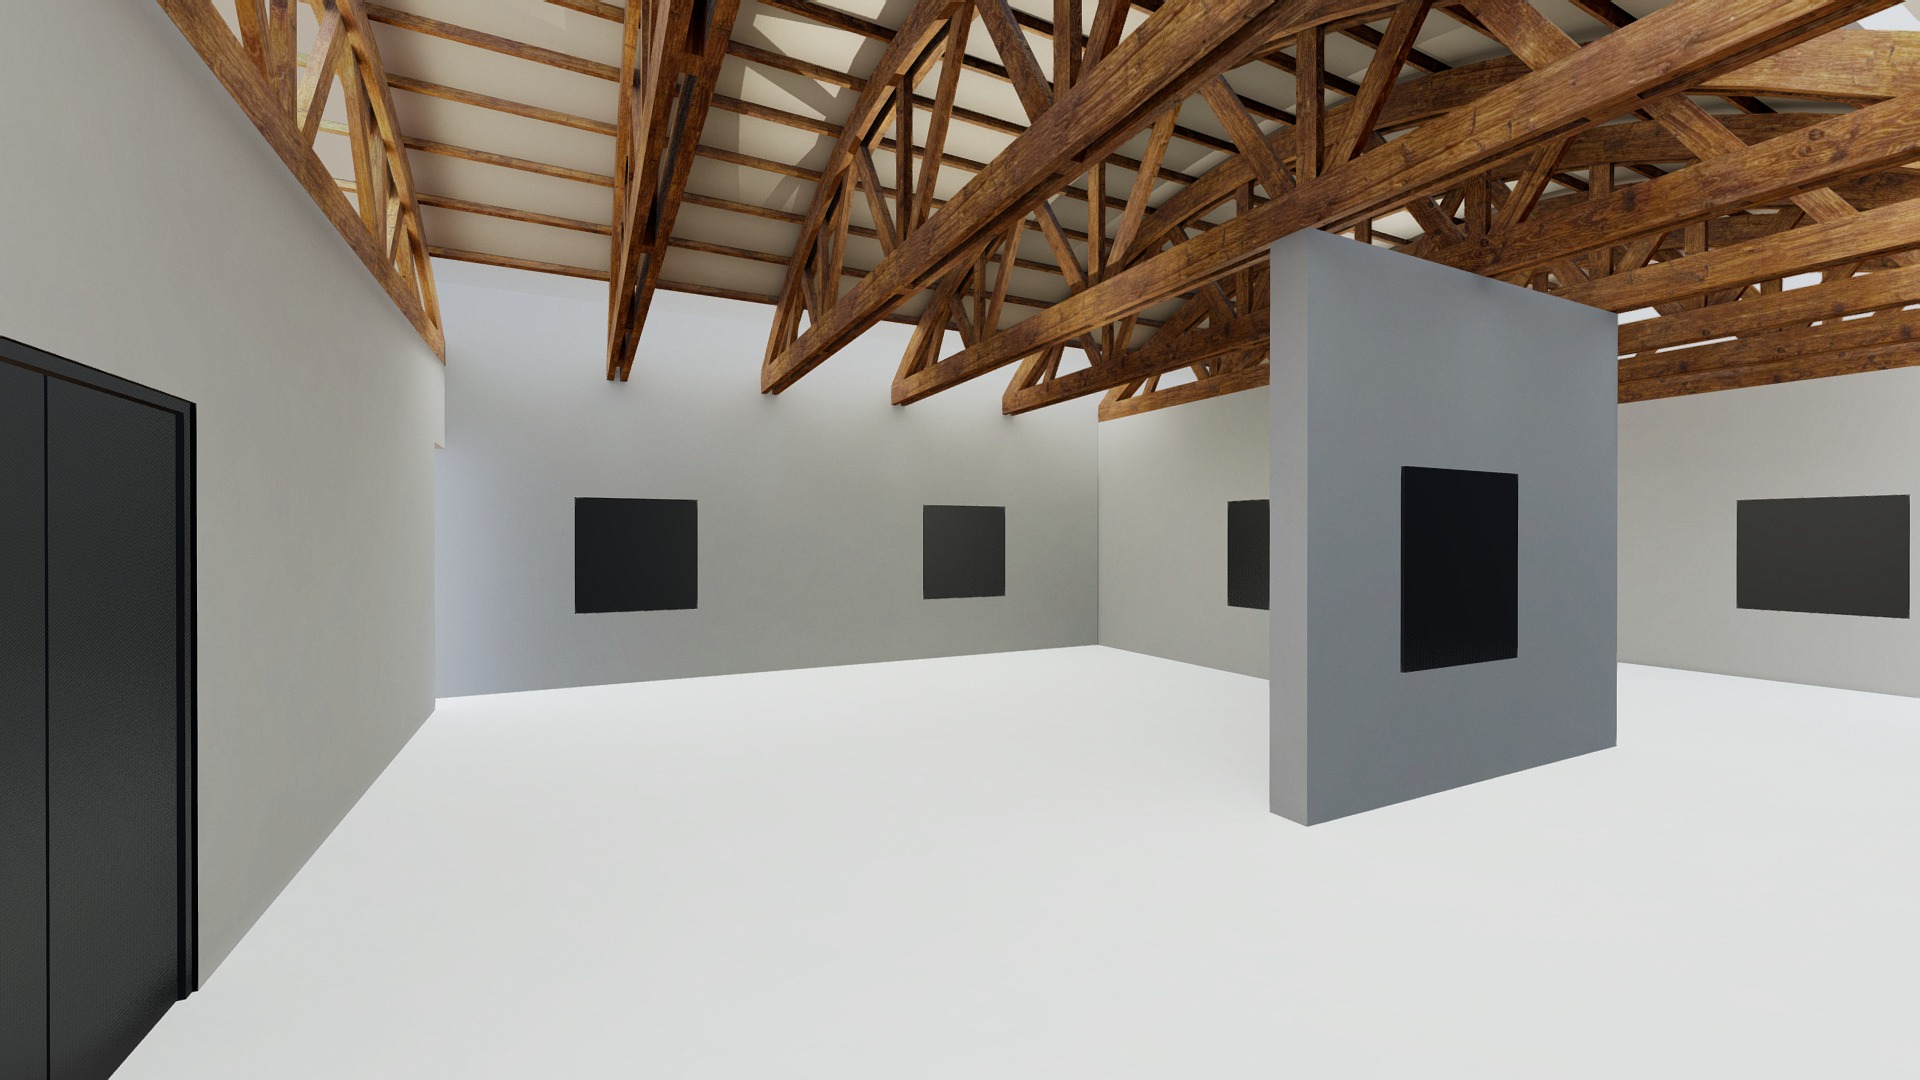 3D model VR Art Gallery – Wooden Beams - This is a 3D model of the VR Art Gallery - Wooden Beams. The 3D model is about a room with a wood ceiling and black square objects.